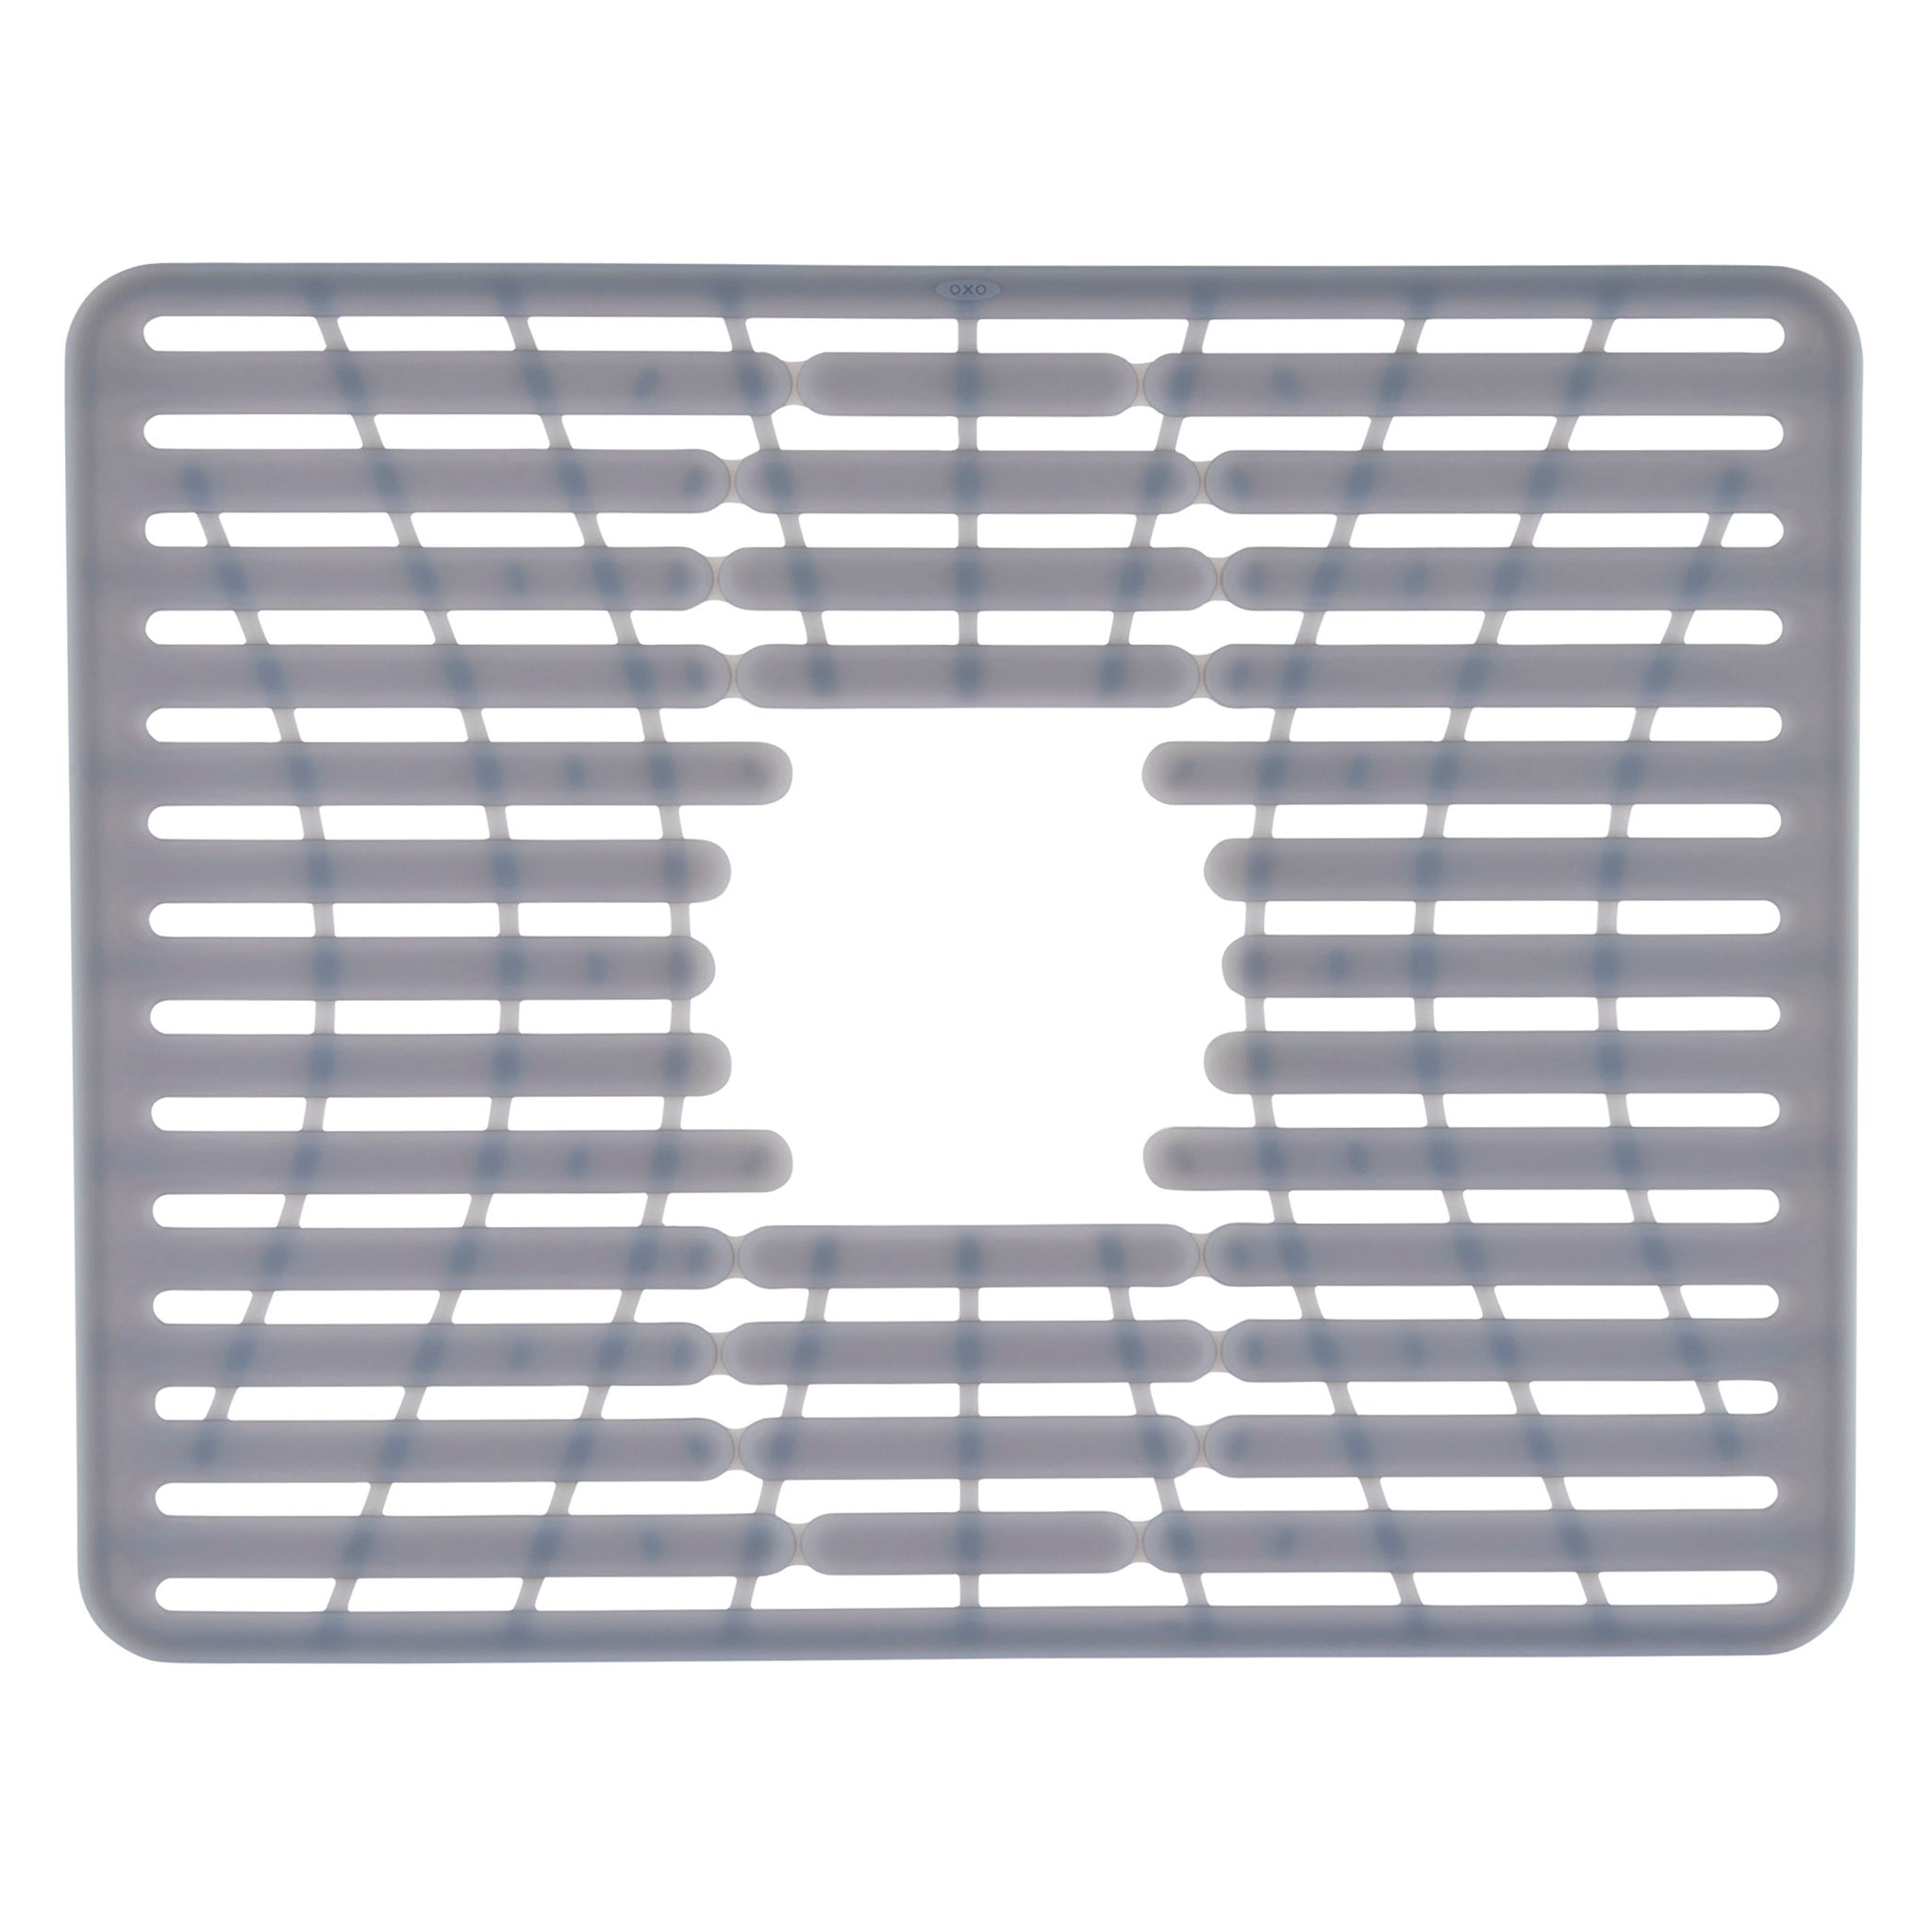 Oxo Good Grips Silicone Large Sink Mat